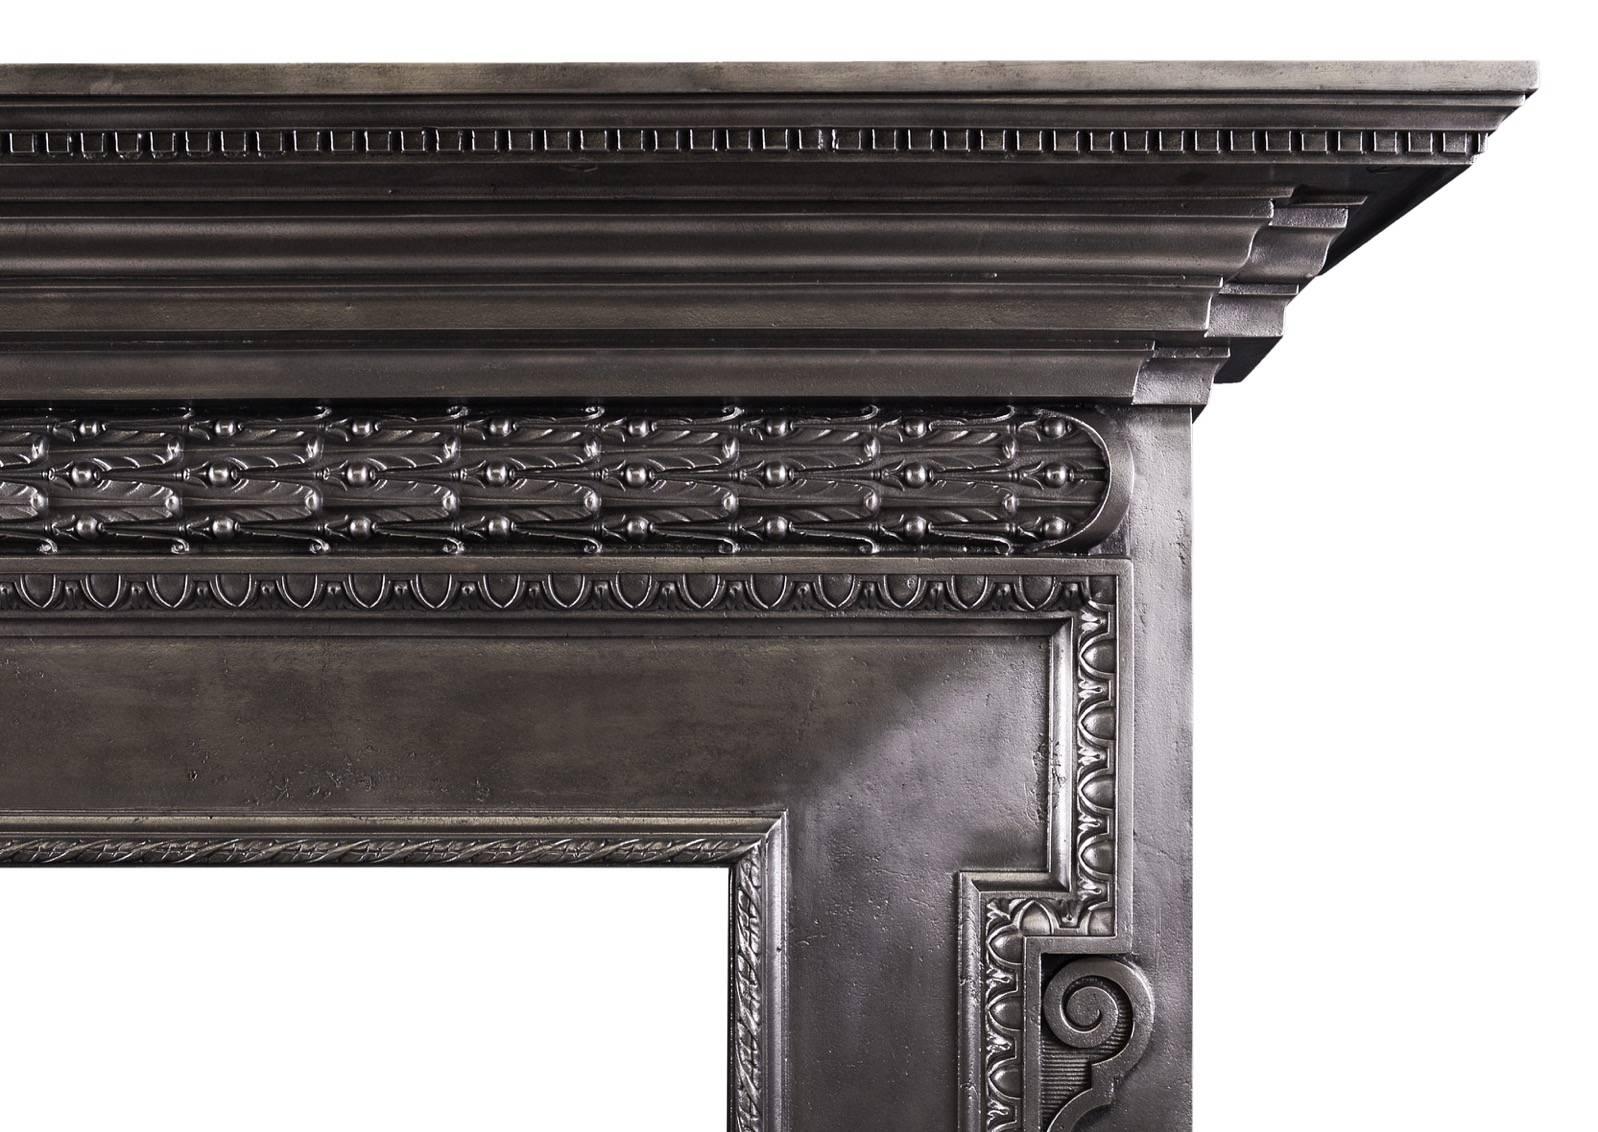 A polished cast iron fireplace in the mid-18th century style. The barrel frieze with flowing oak leaves and cross banded ribbon to centre. The jambs with scrollwork throughout with egg-and-tongue and rope moulding embellishments. Substantial moulded